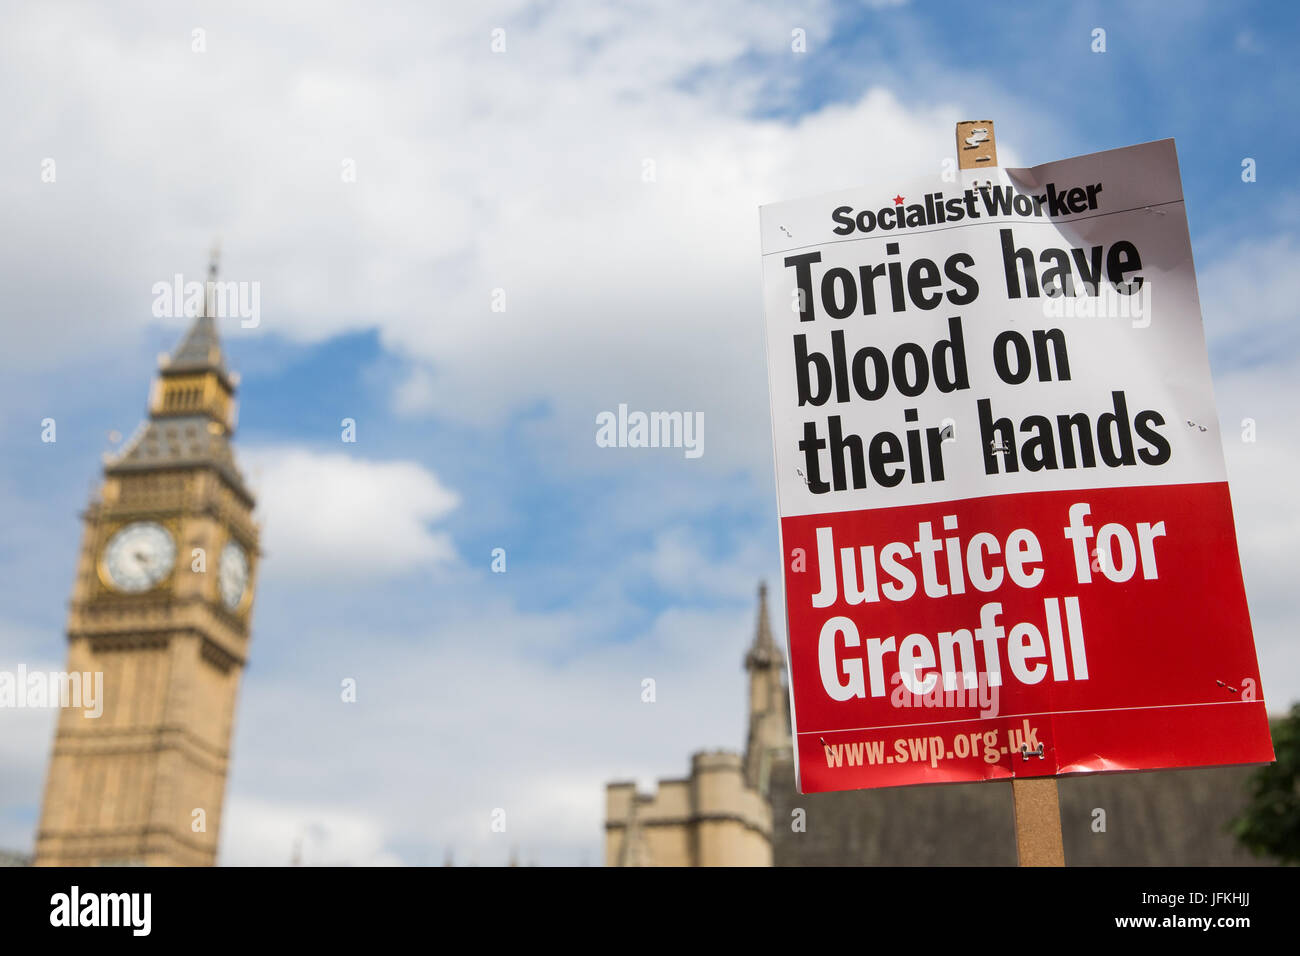 London, UK. 1st July, 2017. A Socialist Worker Justice for Grenfell placard in front of Parliament during the Not One More Day national demonstration organised by the People's Assembly Against Austerity in protest against continuing austerity, cuts and privatisation and to call for a properly funded health service, education system and housing. A minute's silence was also held for the victims of the fire at Grenfell Tower. Credit: Mark Kerrison/Alamy Live News Stock Photo